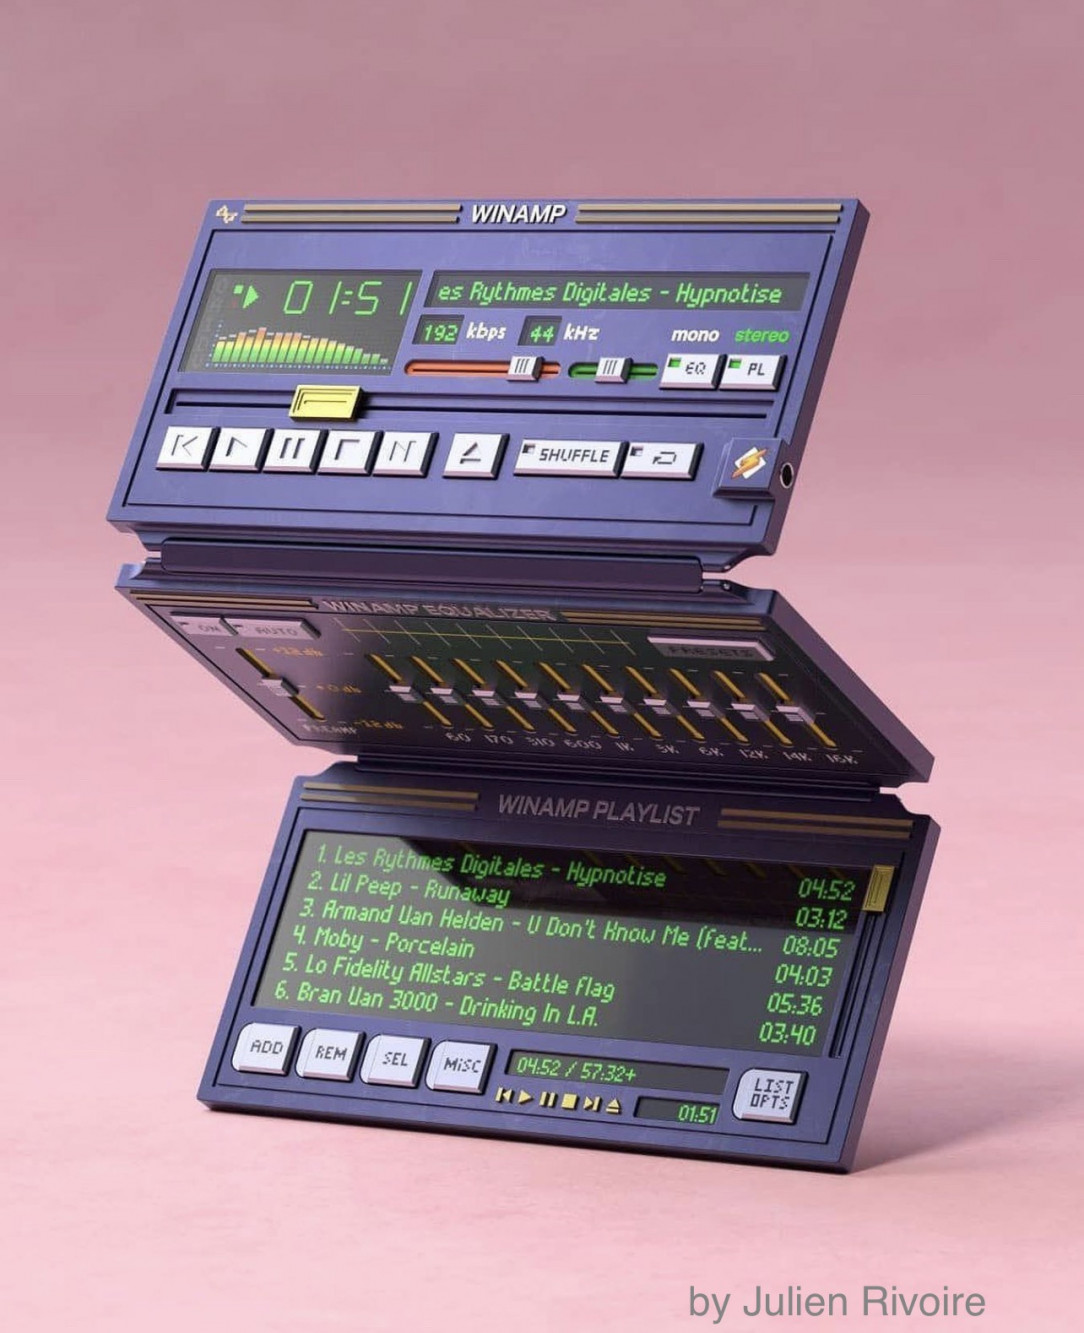 What if Winamp were a portable music player?